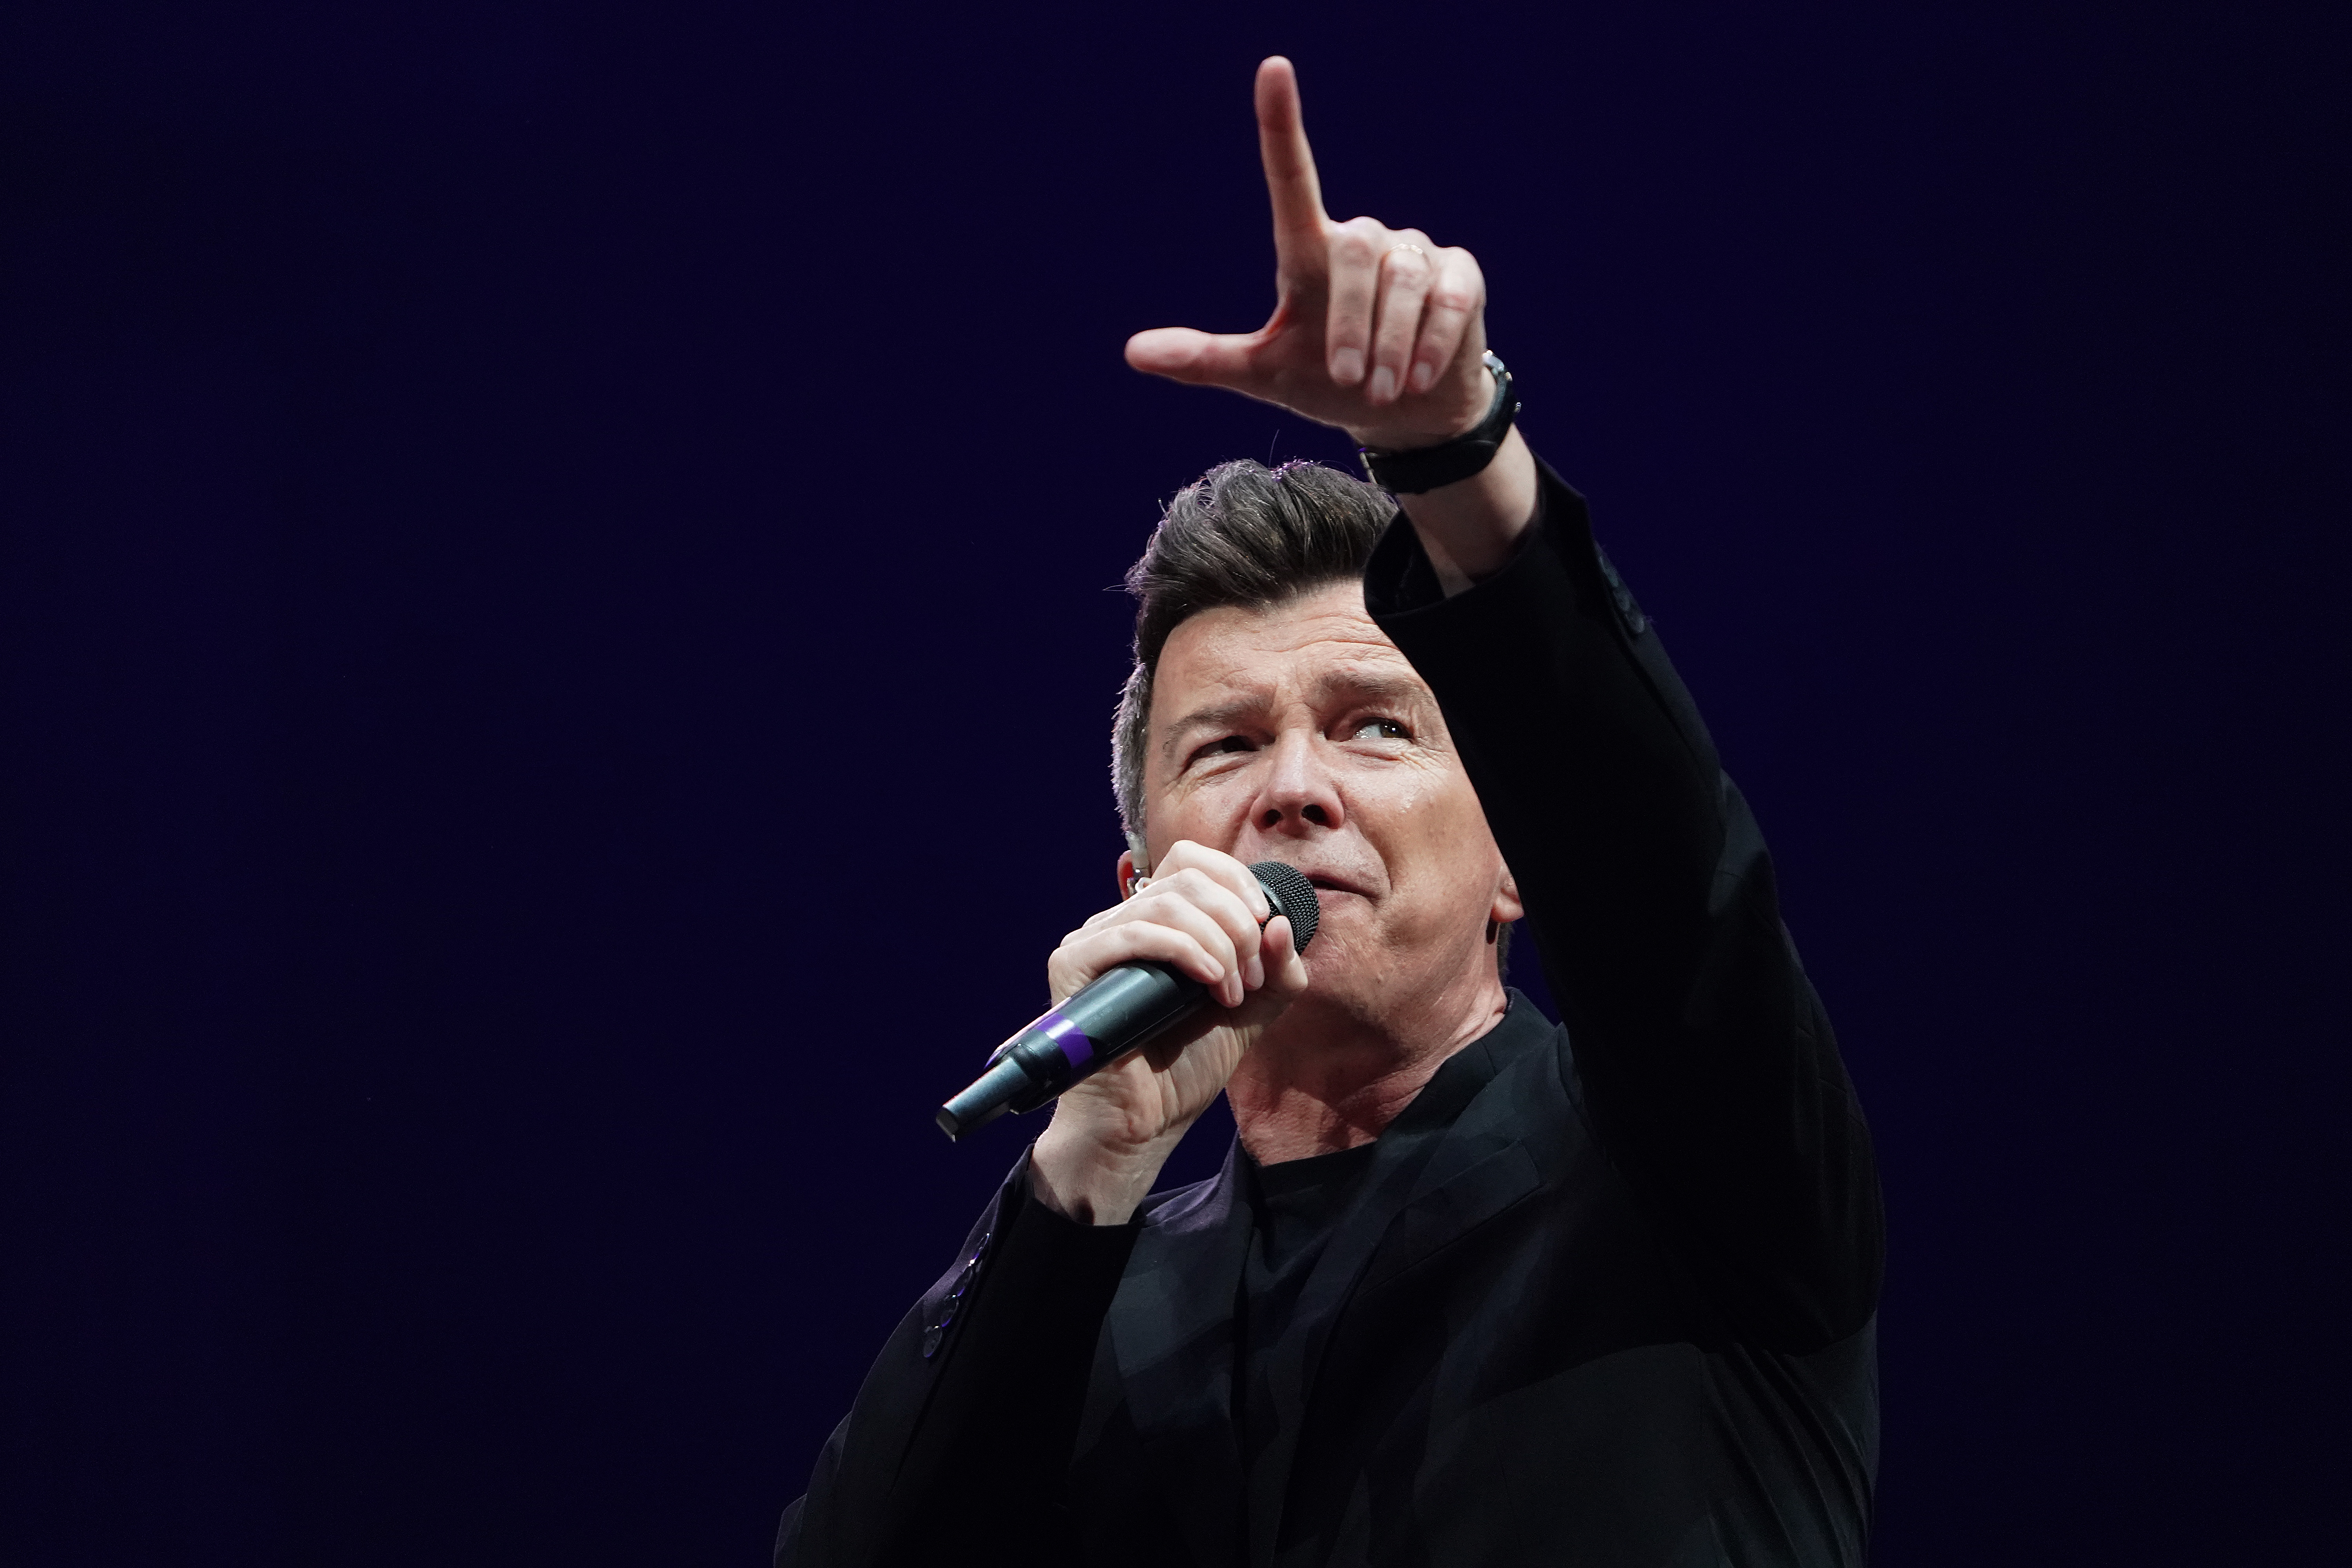 Thanks To A Long-Running Internet Meme, Rick Astley's 'Never Gonna Give You  Up' Has Reached More Than A Billion Views On